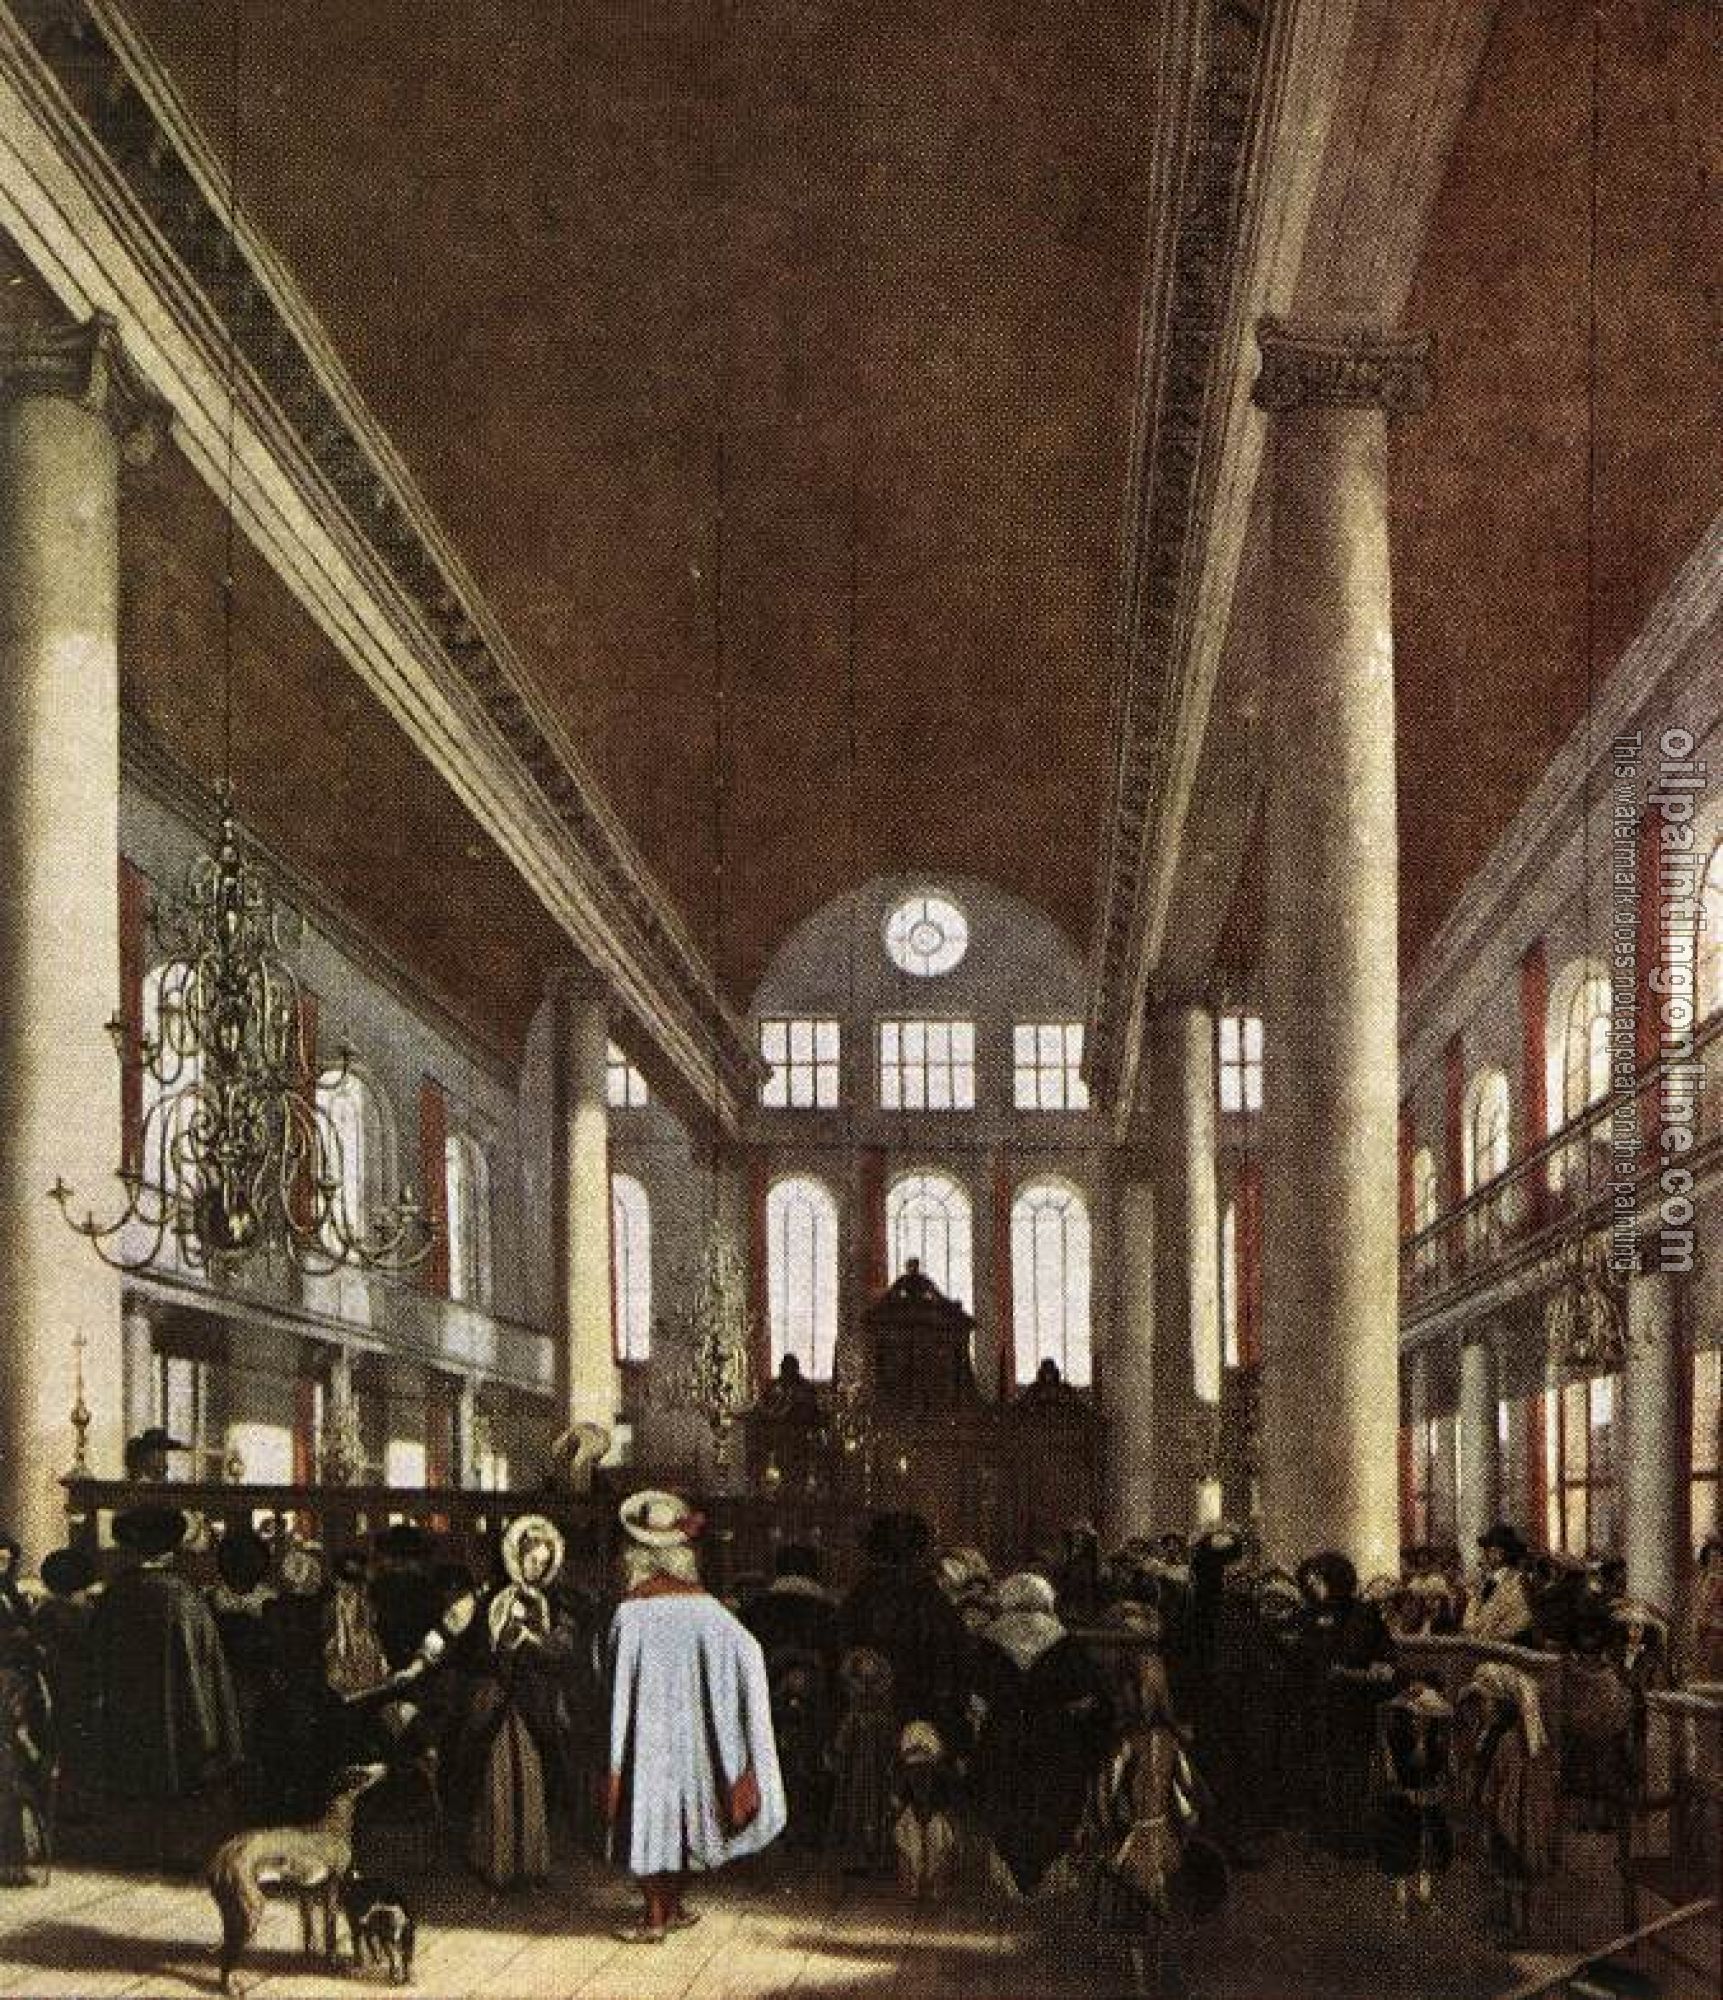 Witte, Emanuel de - Interior of the Portuguese Synagogue in Amsterdam